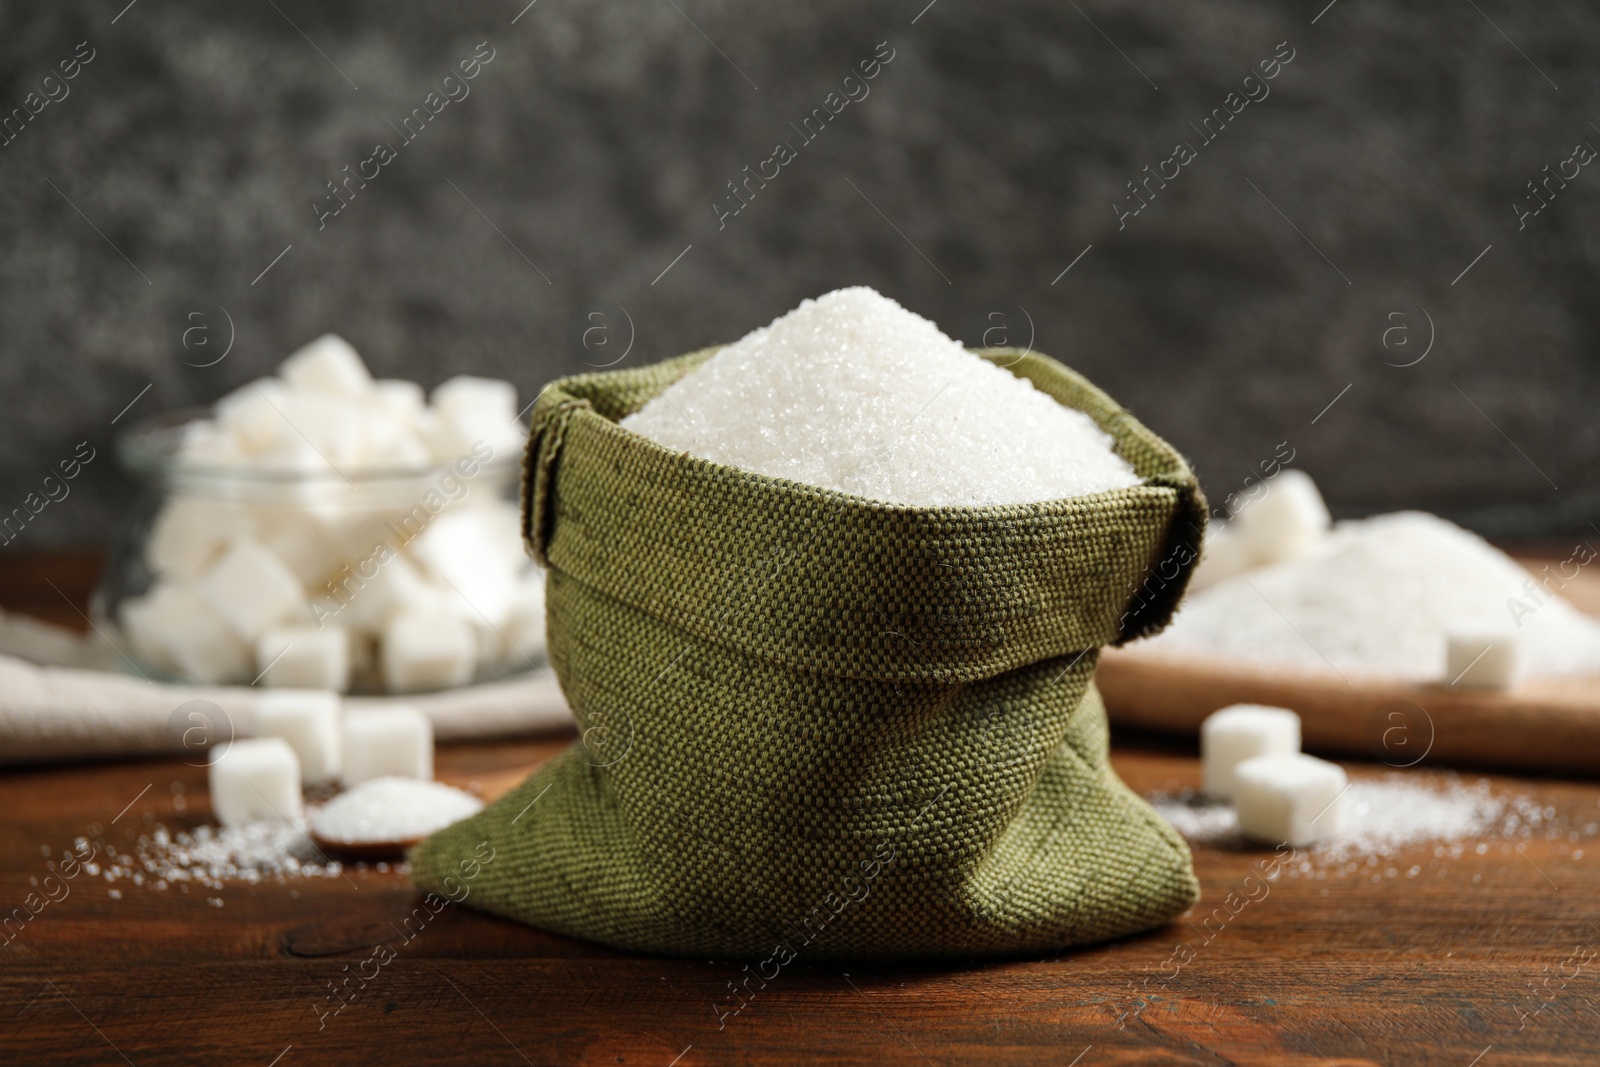 Photo of Granulated sugar in sack on wooden table